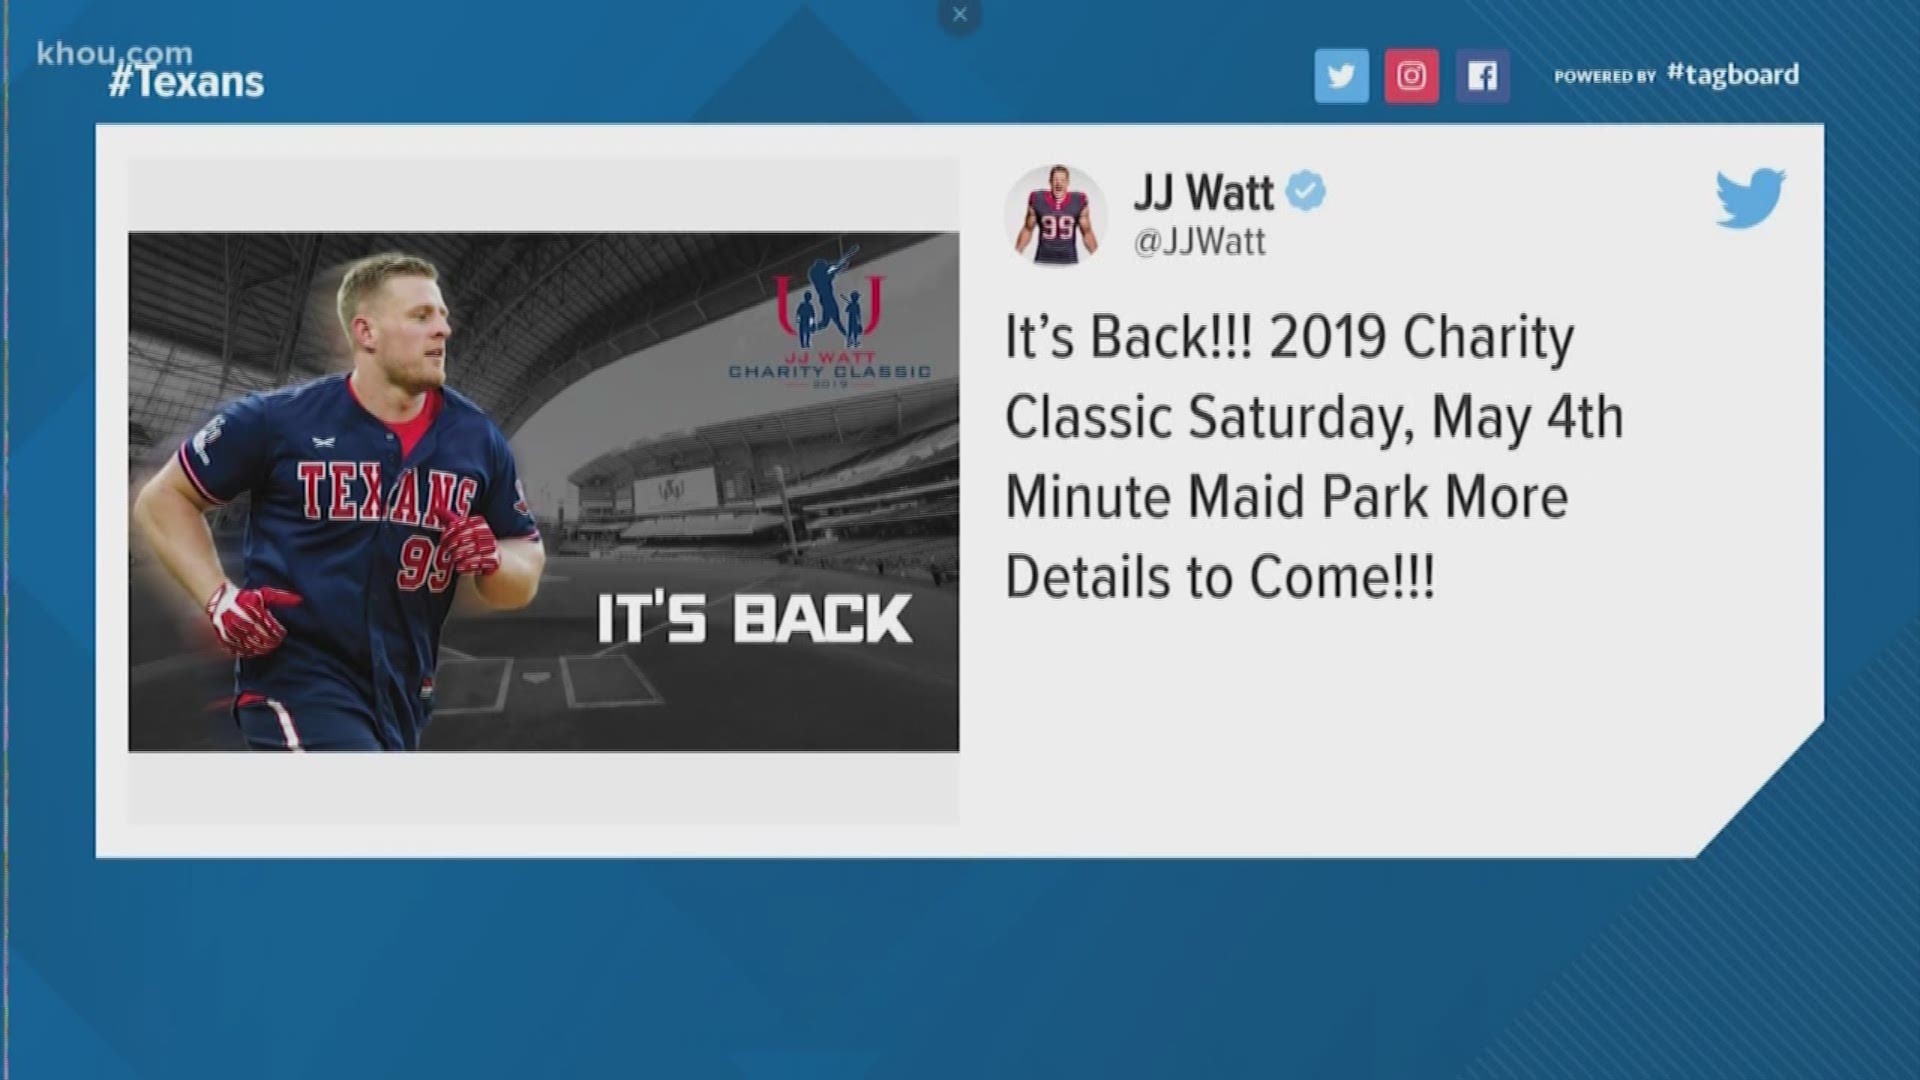 The J.J. Watt Charity Classic softball game will return in 2019, the Texans star confirmed on Twitter Tuesday afternoon.